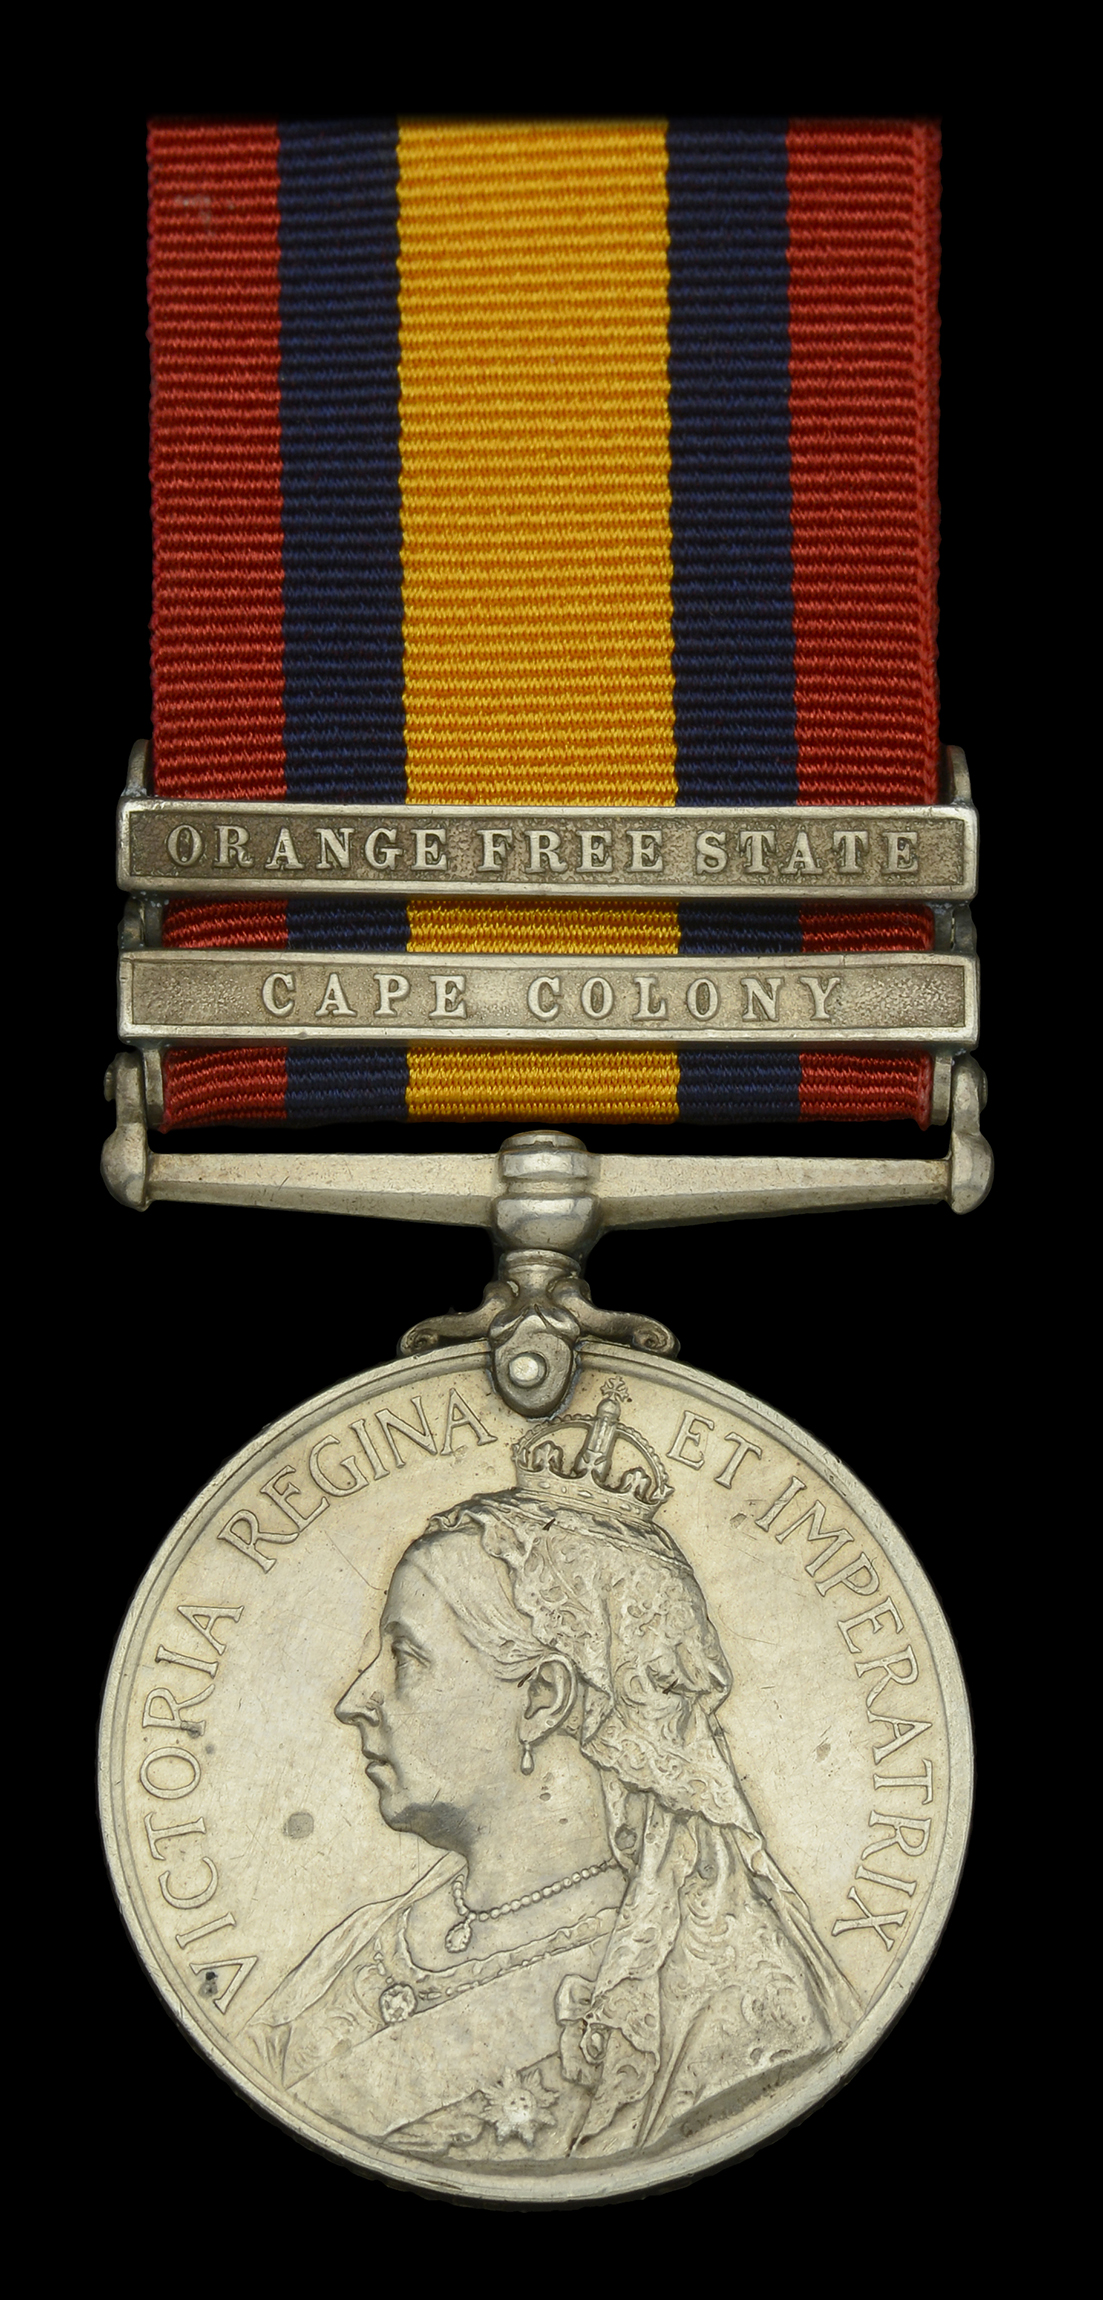 Queen's South Africa 1899-1902, 2 clasps, Cape Colony, Orange Free State (2199 Cpl. H. Cobbo...